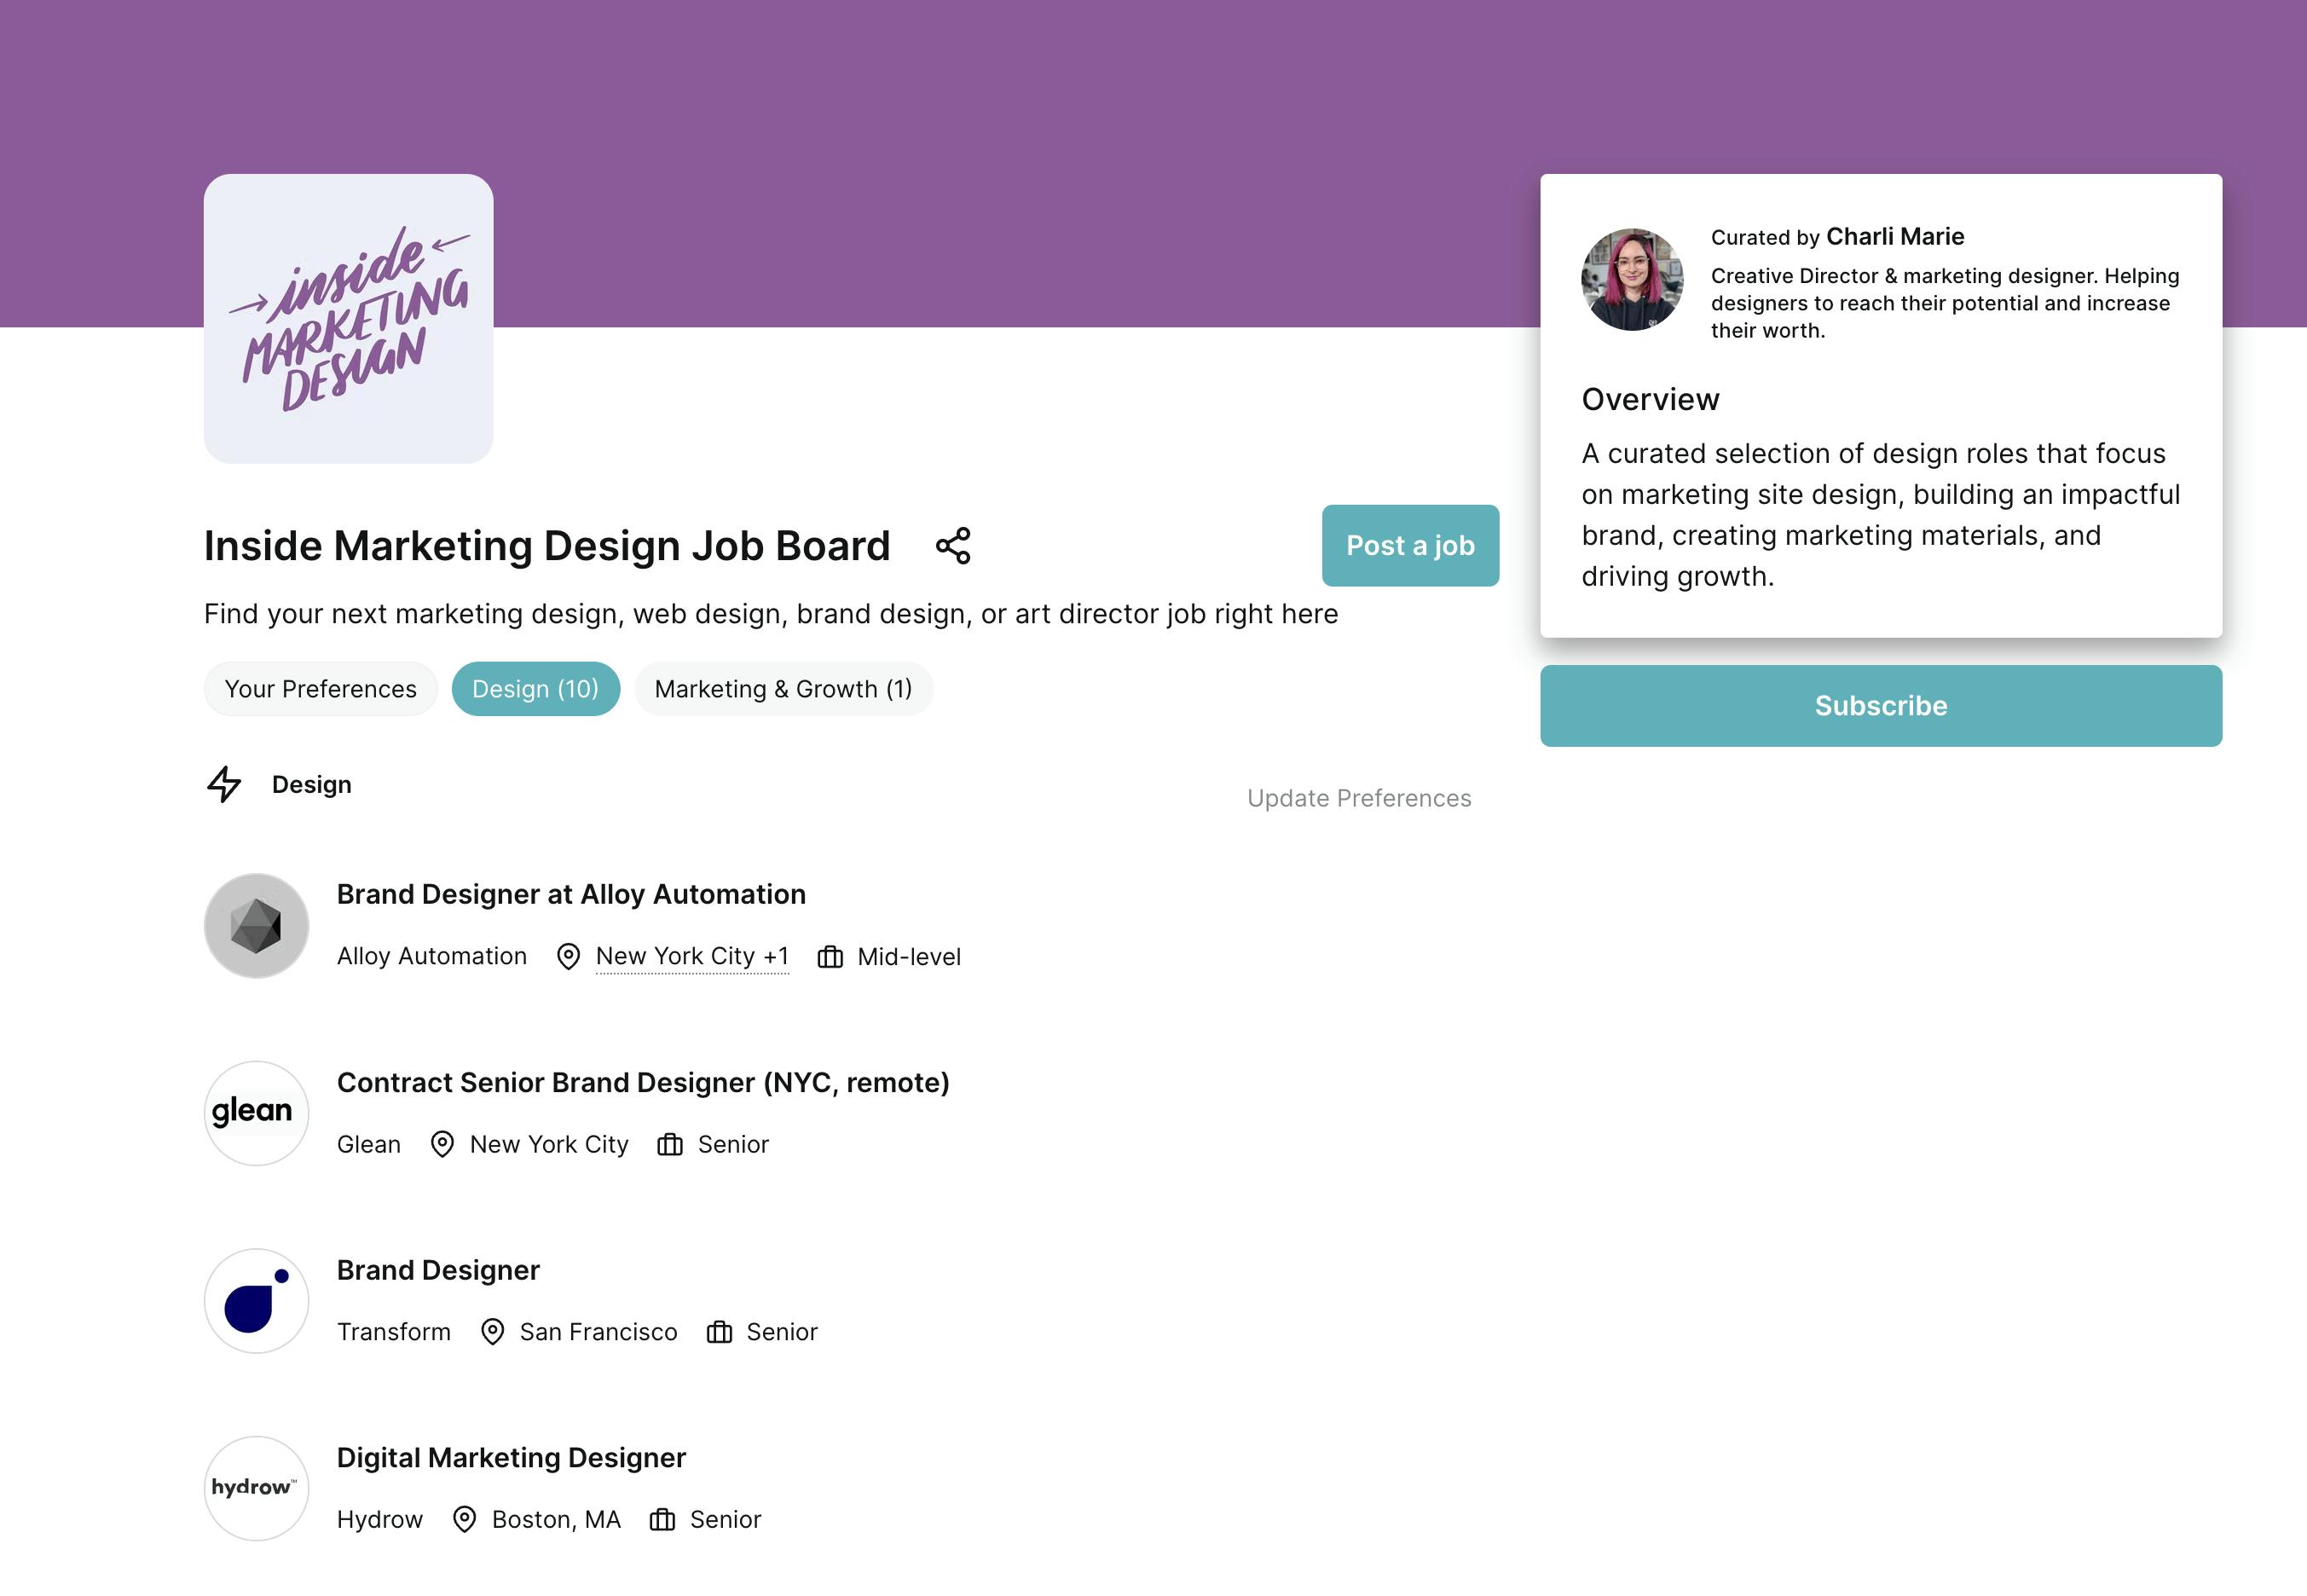 A screenshot of the design job board, showing open jobs like "Brand Designer at Alloy Automation", and "Digital Marketing Designer at Hydrow"